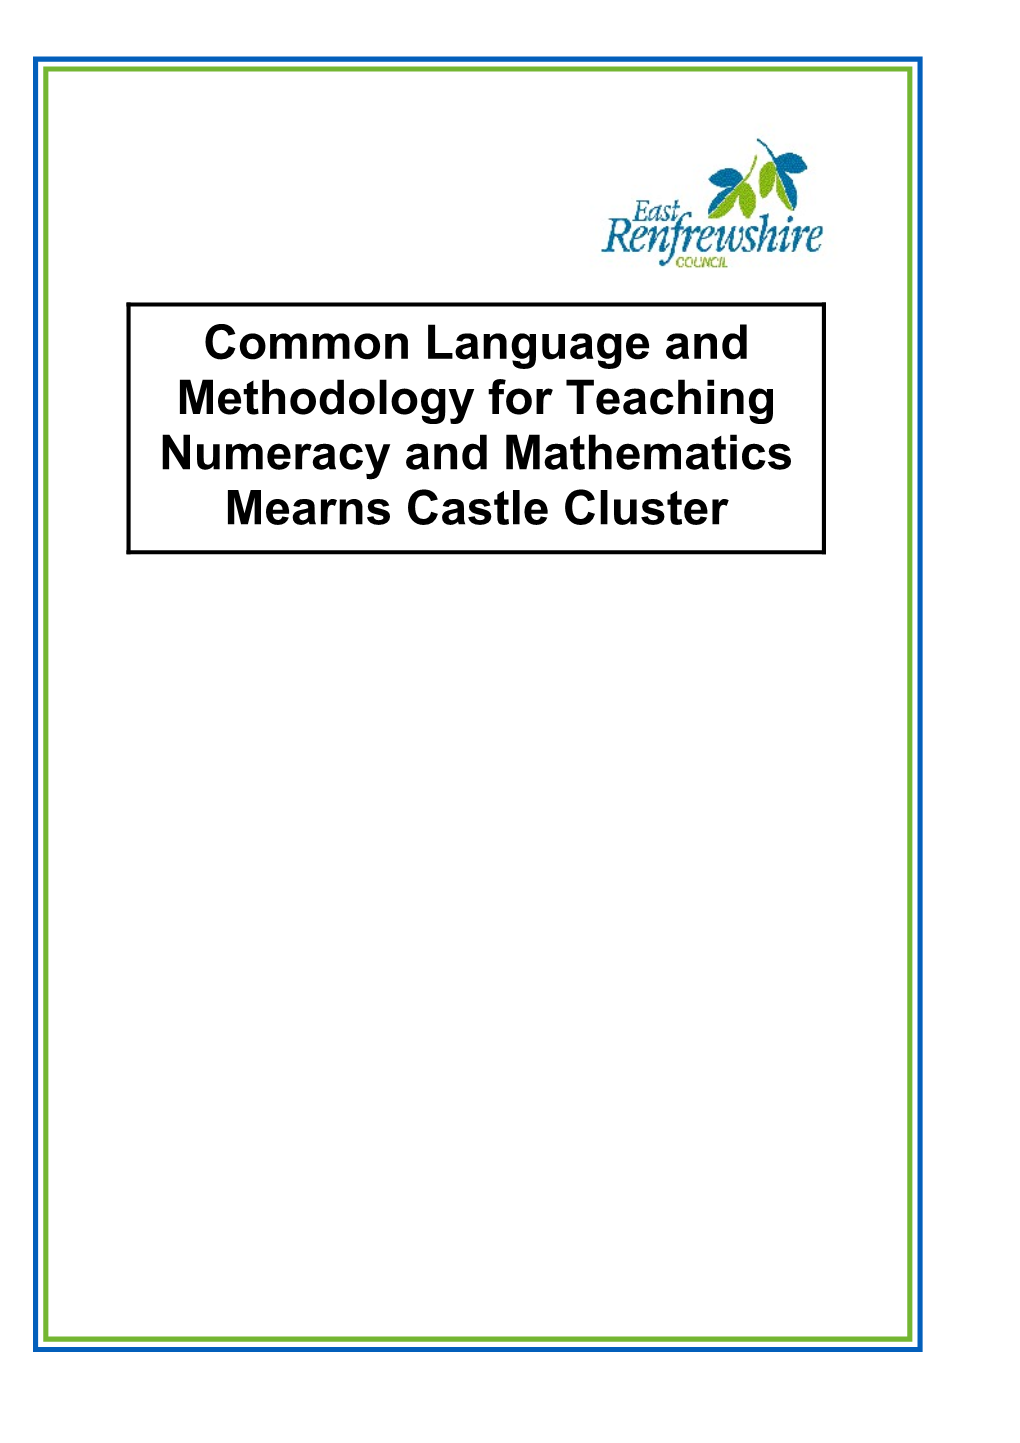 Common Language and Methodology for Teaching Numeracy - Mearns Castle Cluster